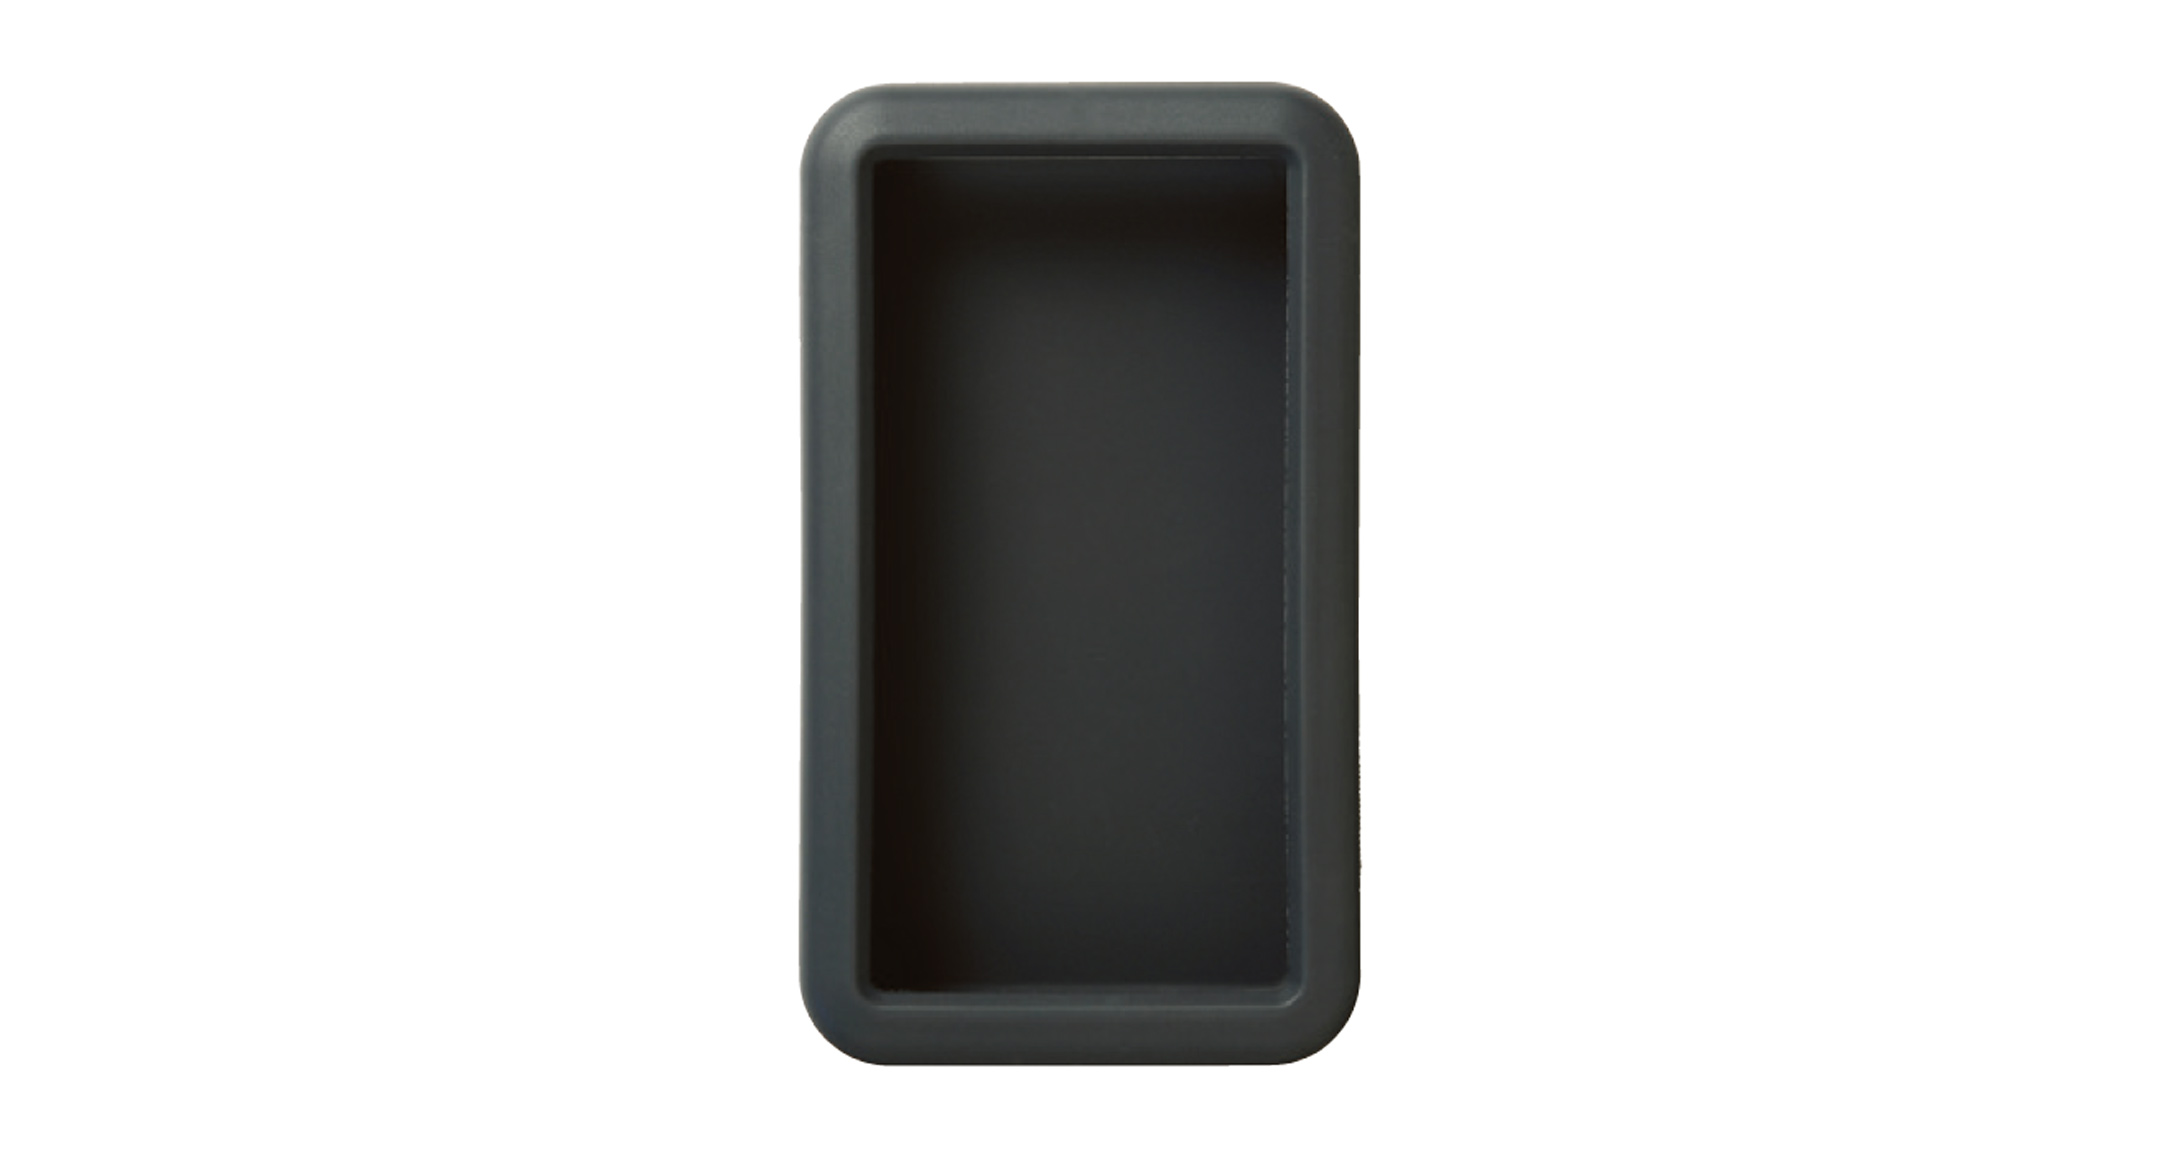 SILICONE COVER for LC series:Dark gray (Similar to PANTONE Cool Gray 11C)